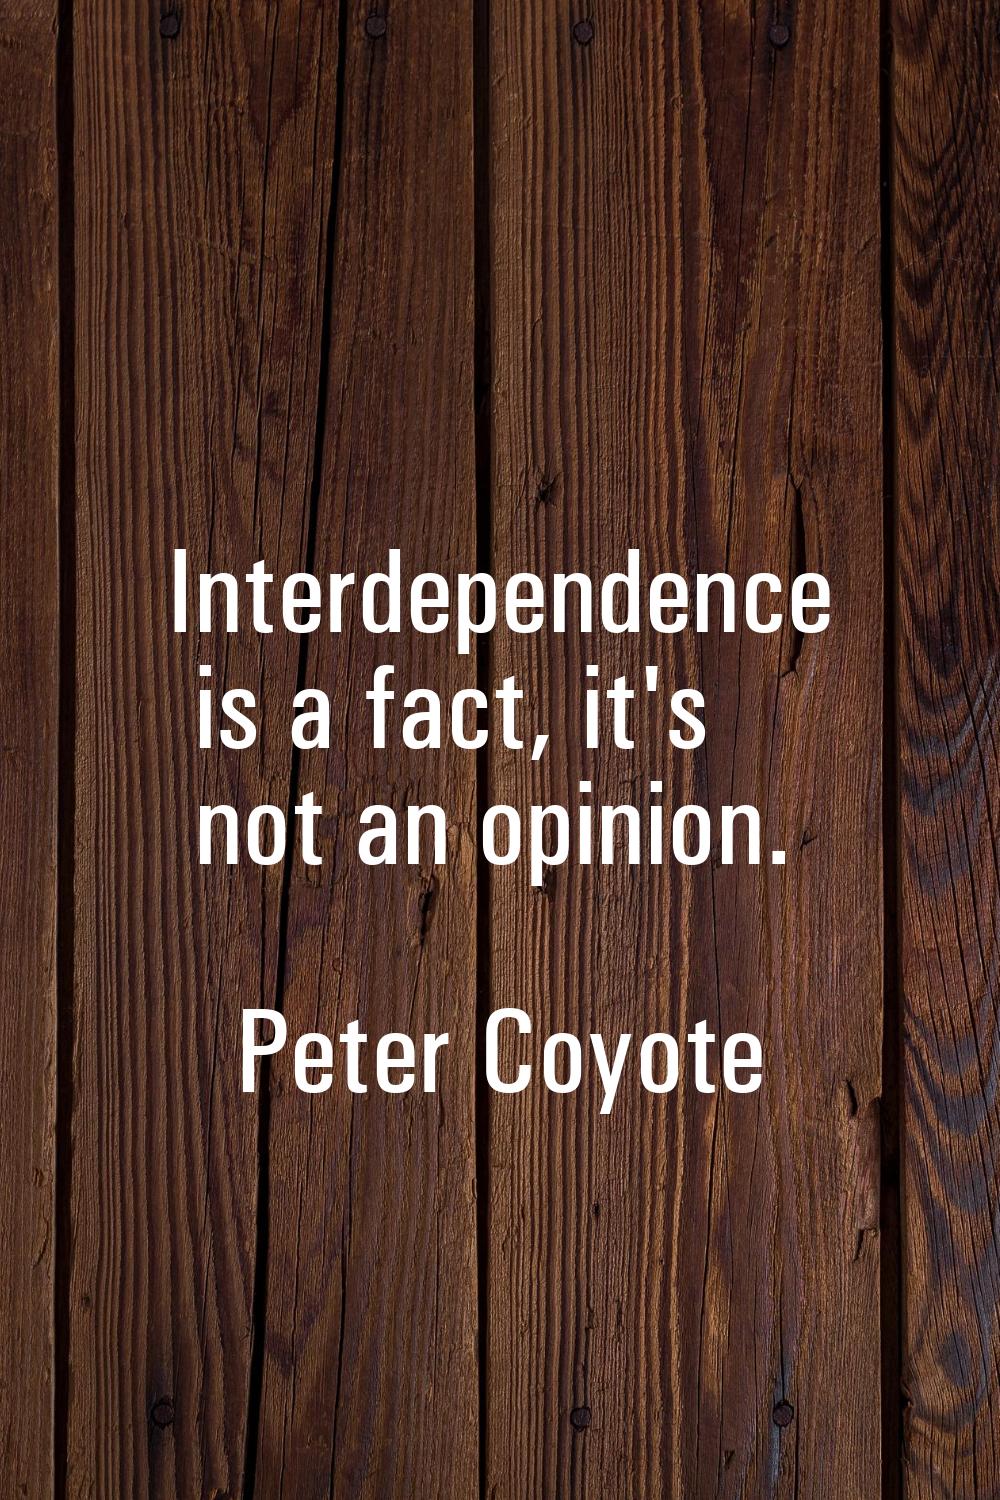 Interdependence is a fact, it's not an opinion.